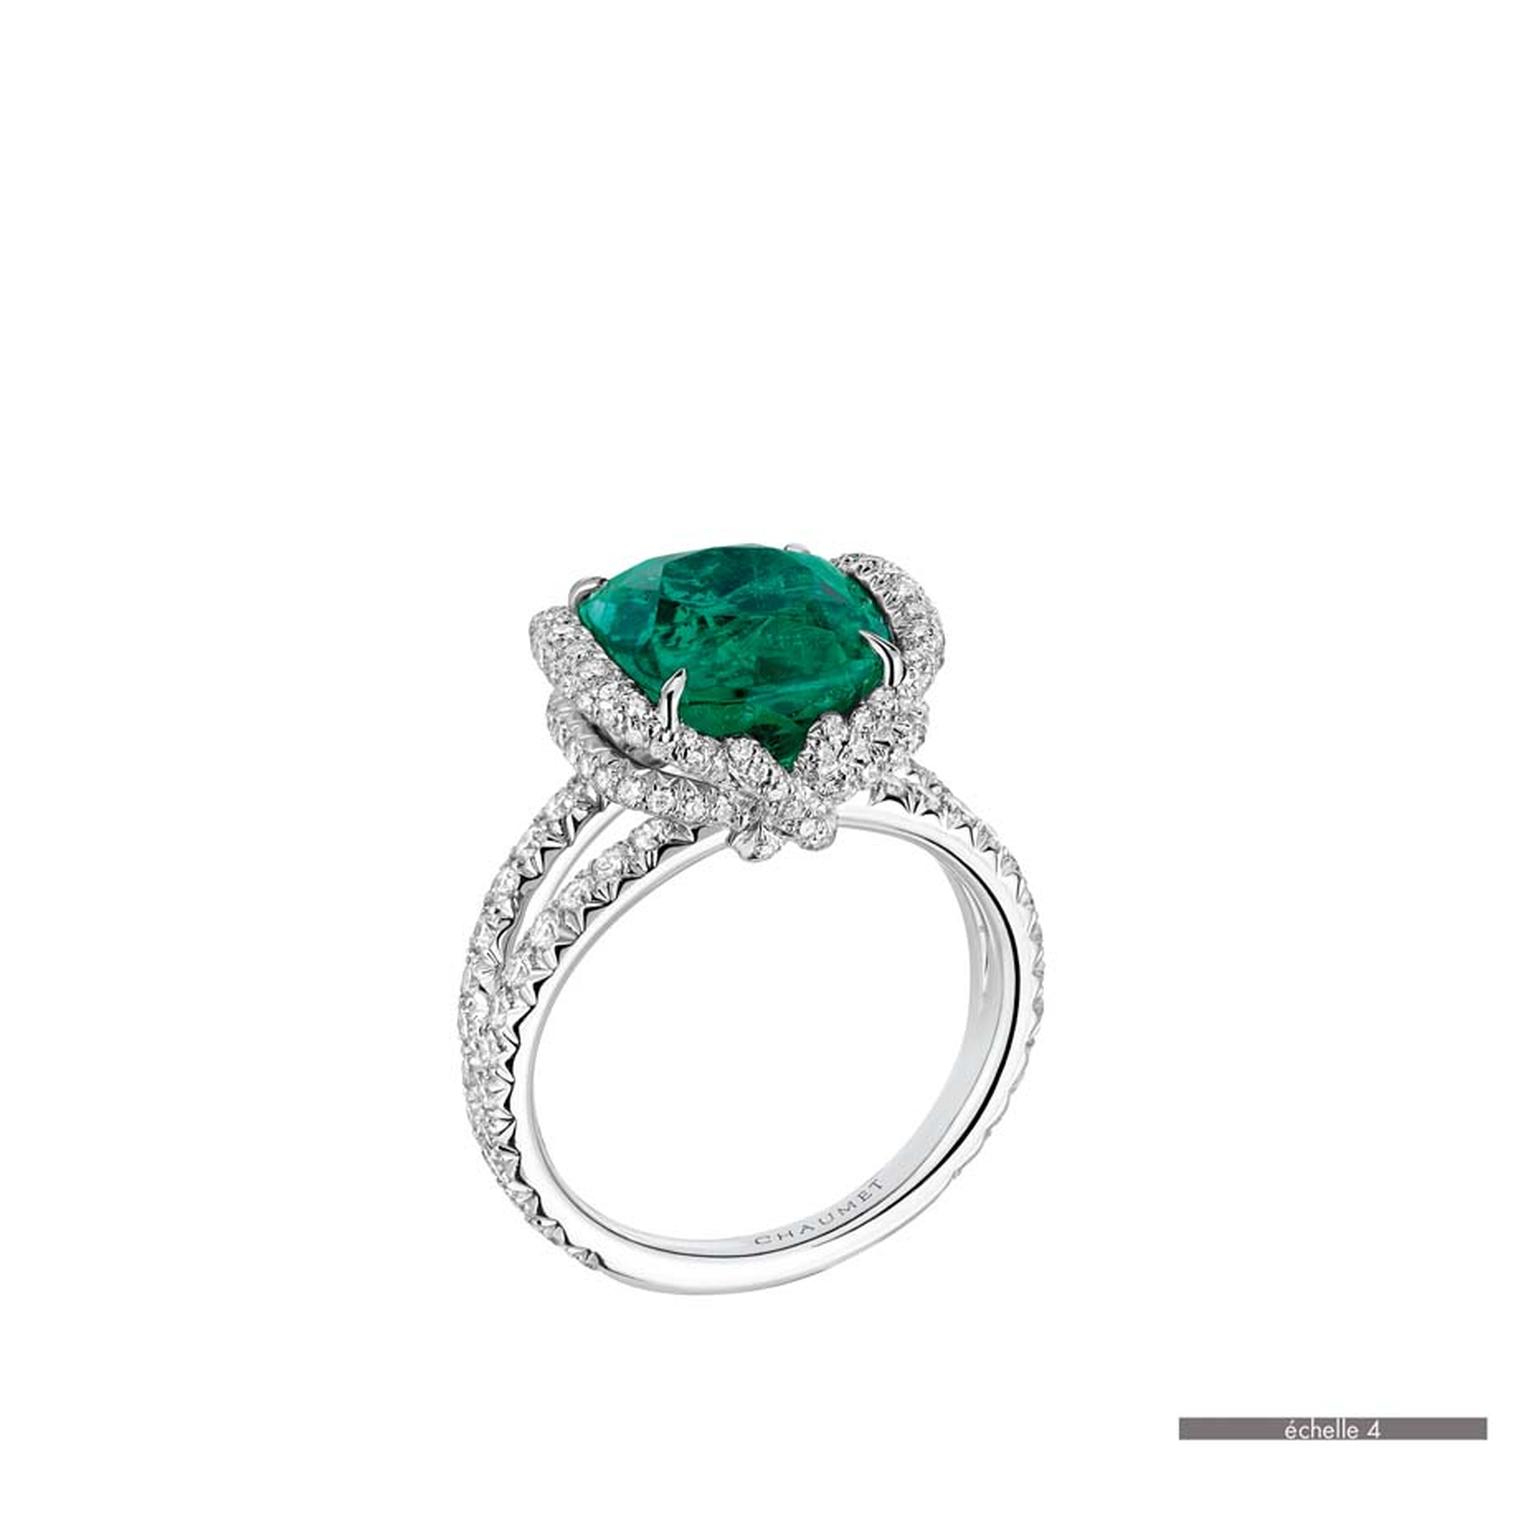 Chaumet Liens ring in white gold featuring 147 brilliant-cut diamonds and a cushion-cut emerald (6.42ct).